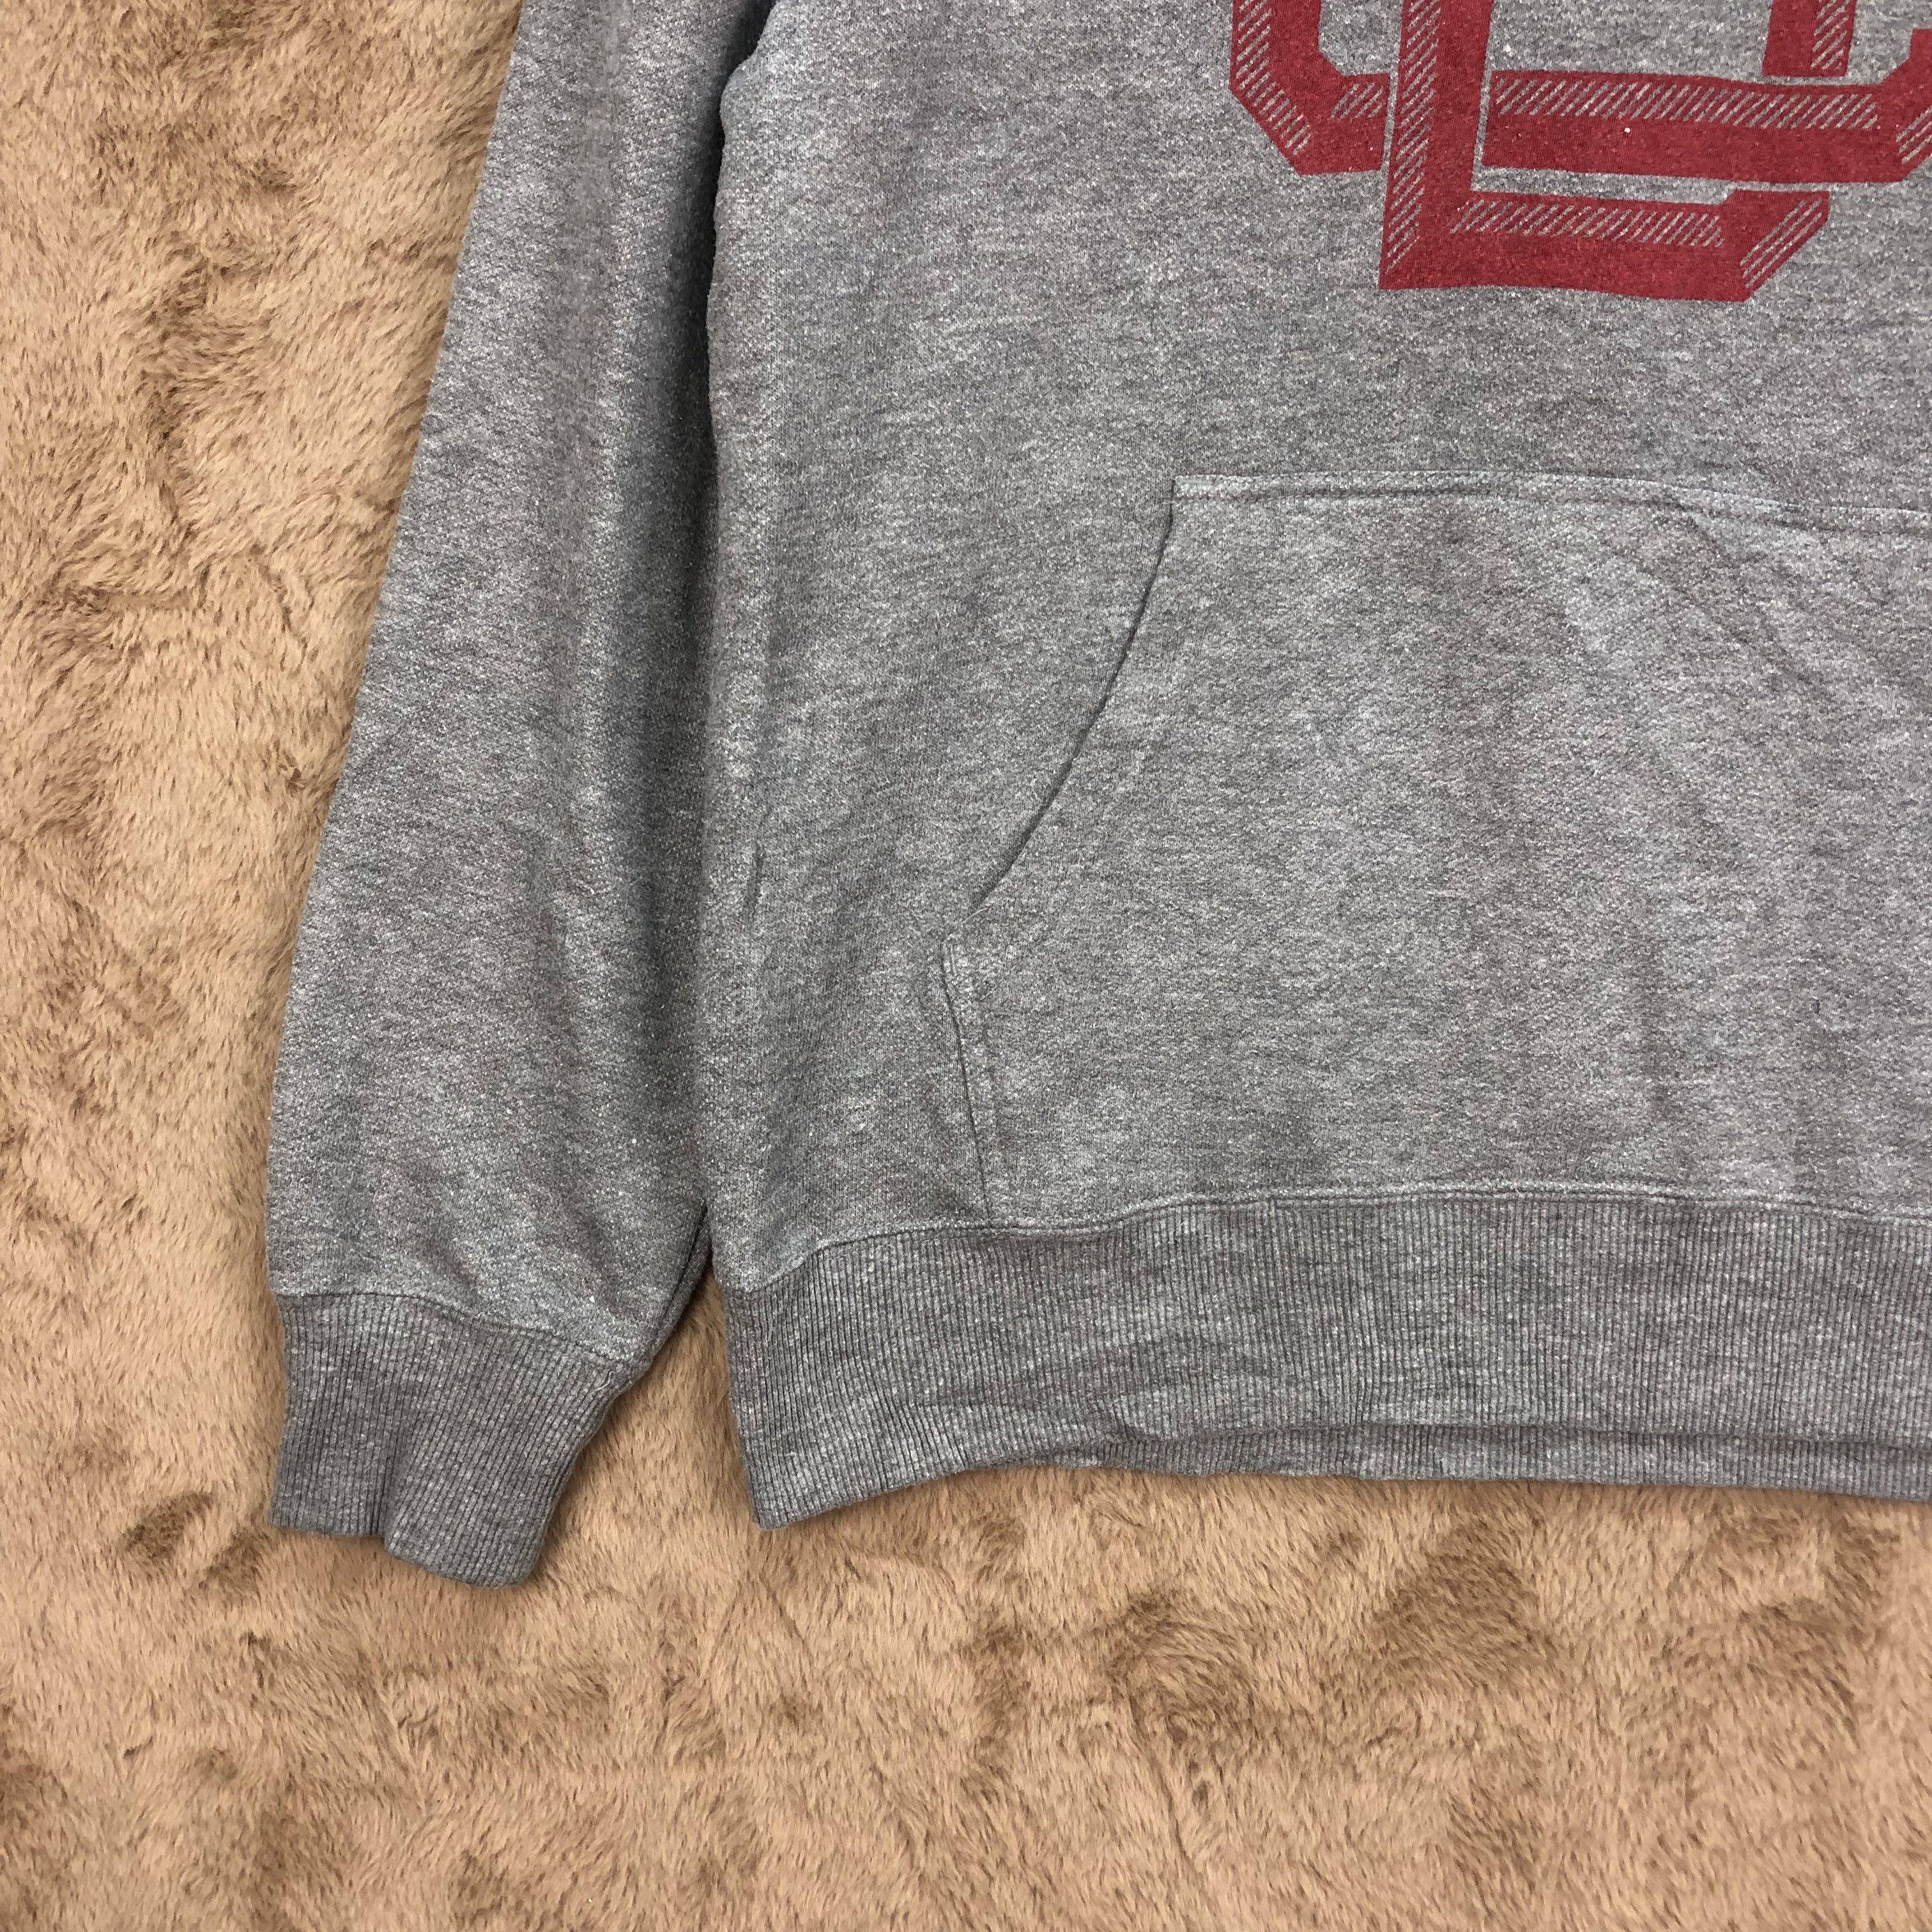 DC SHOES Big Logo Pullover Hoodies #4986-25 - 5